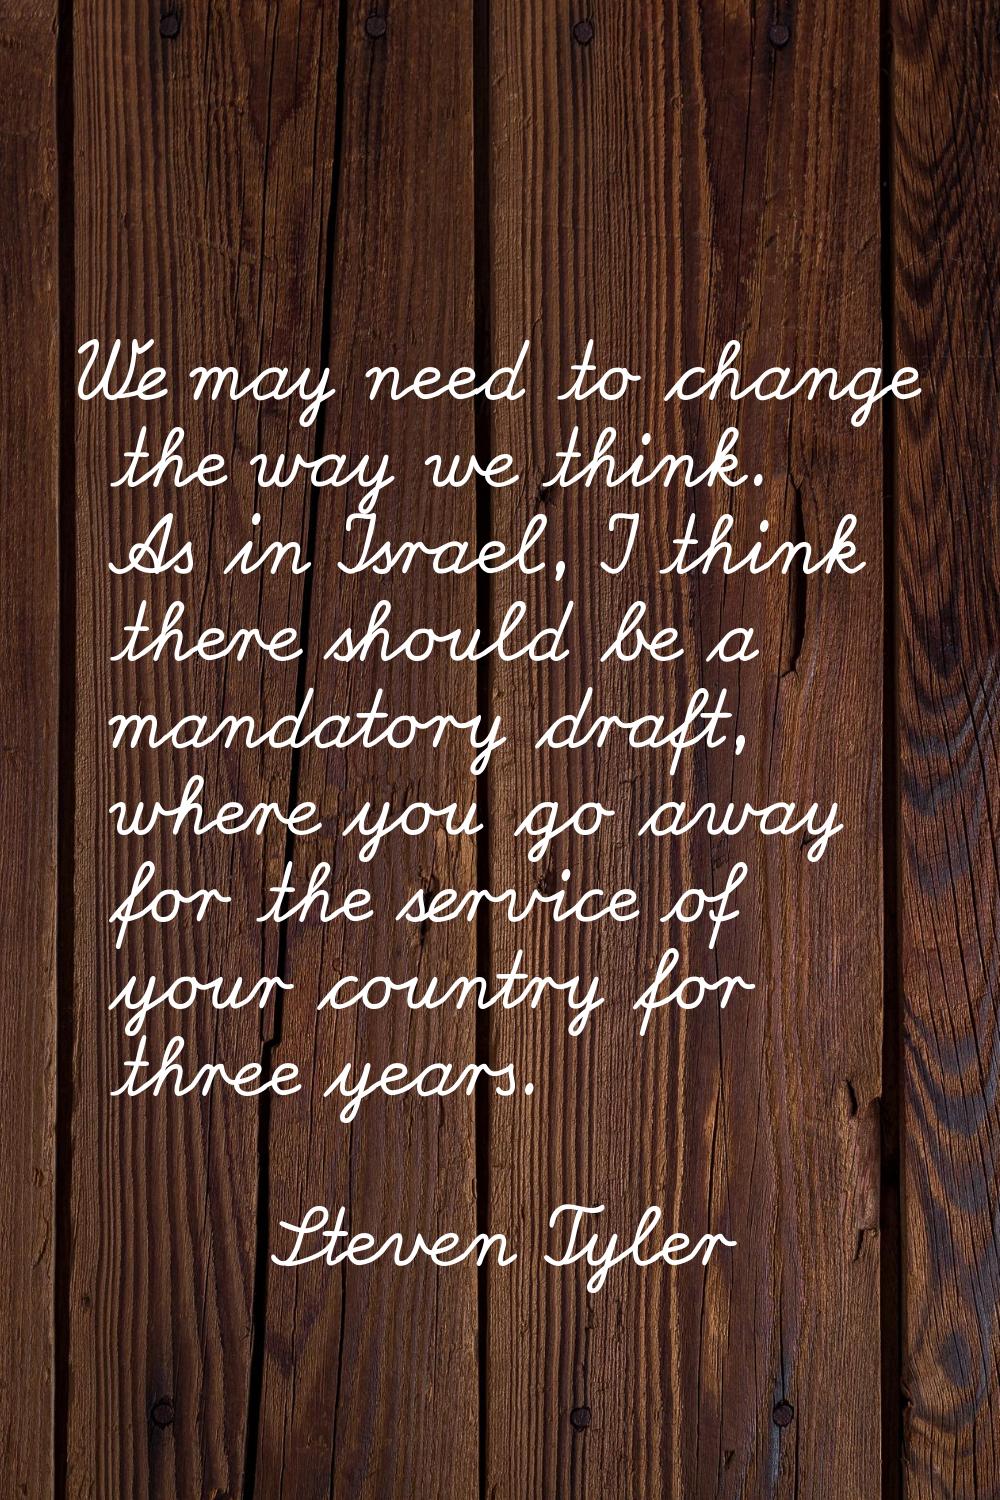 We may need to change the way we think. As in Israel, I think there should be a mandatory draft, wh